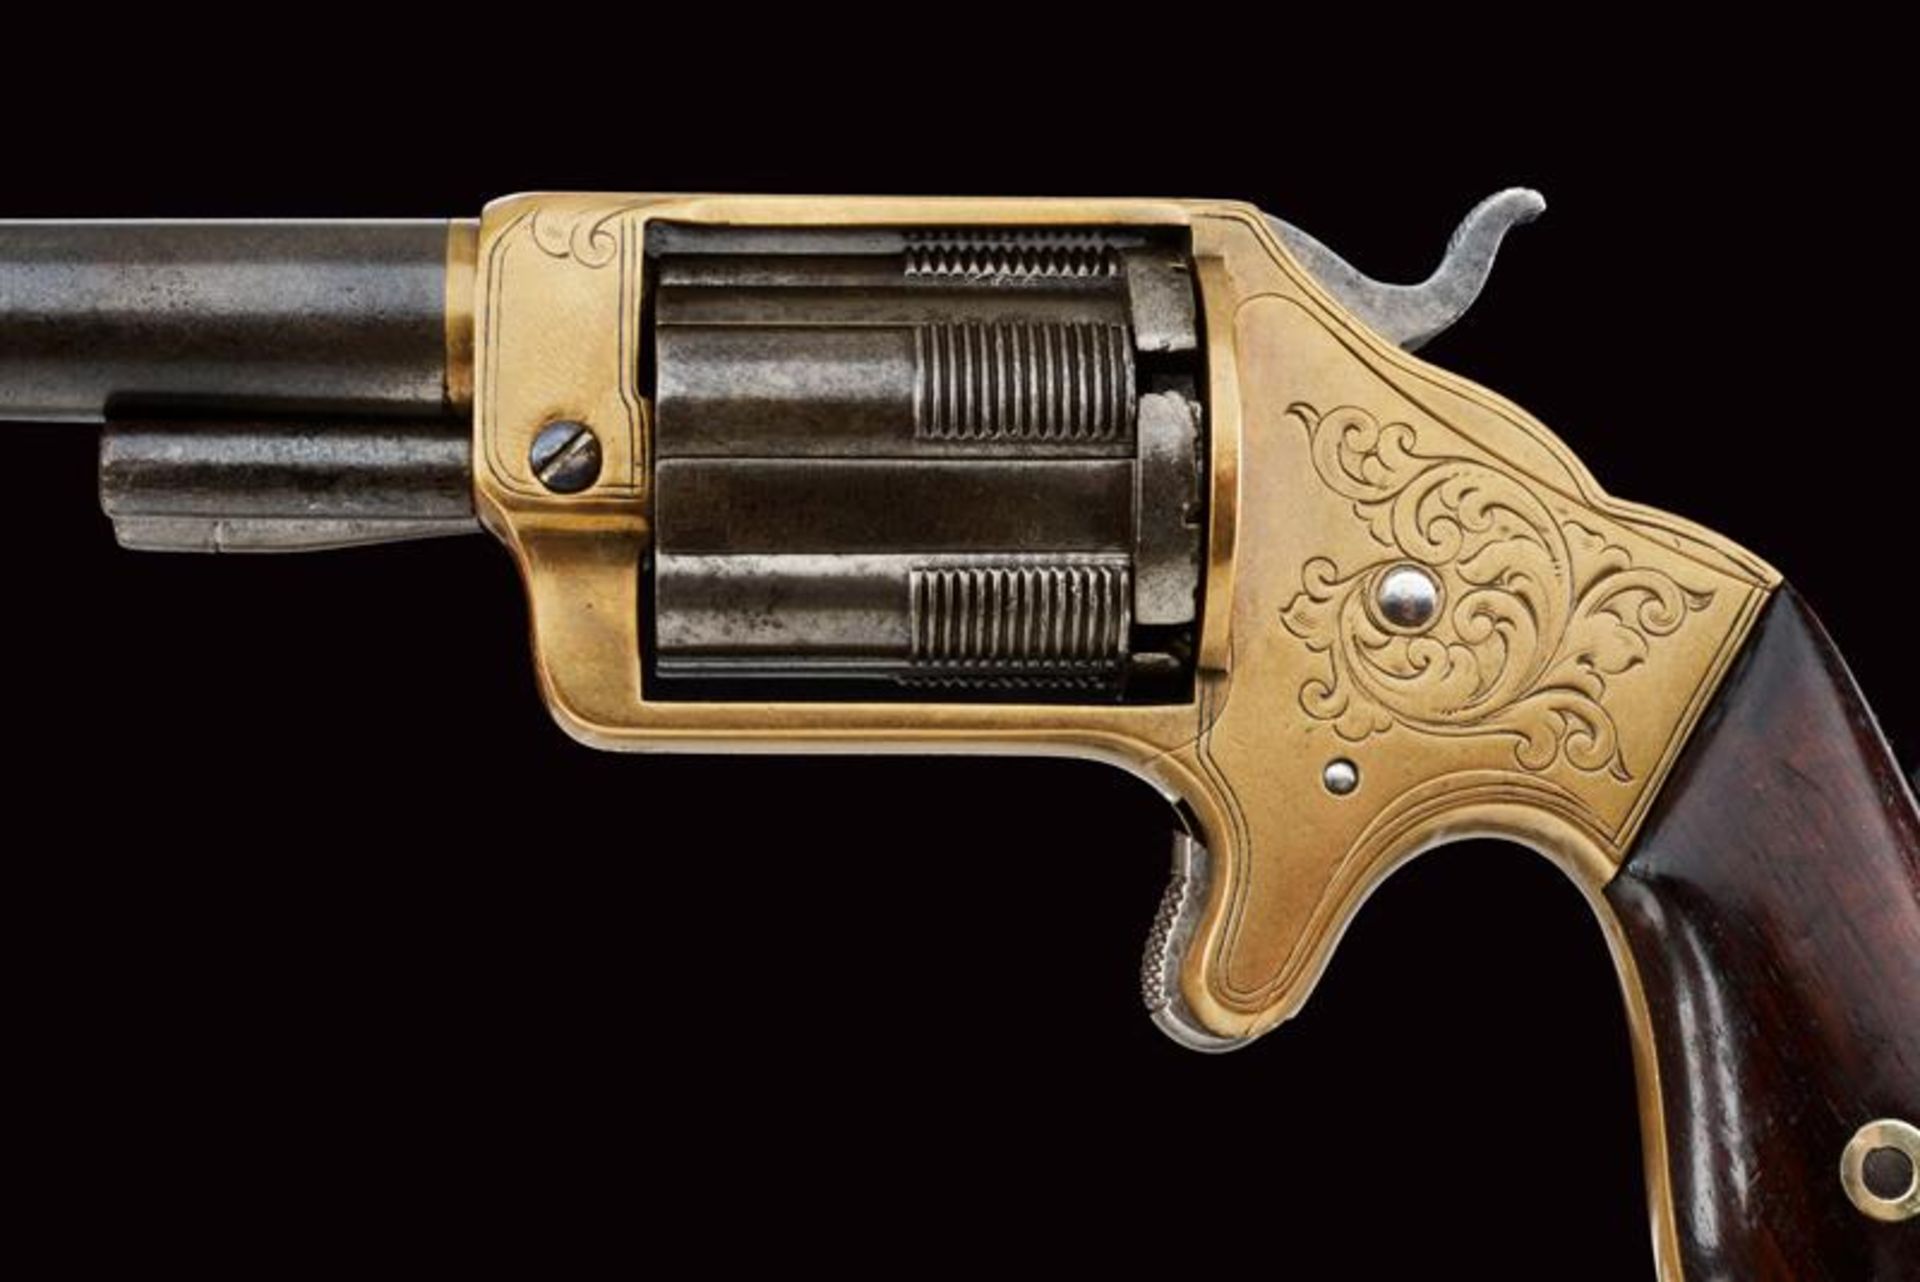 A Slocum Frontloading Pocket Revolver - Image 6 of 7